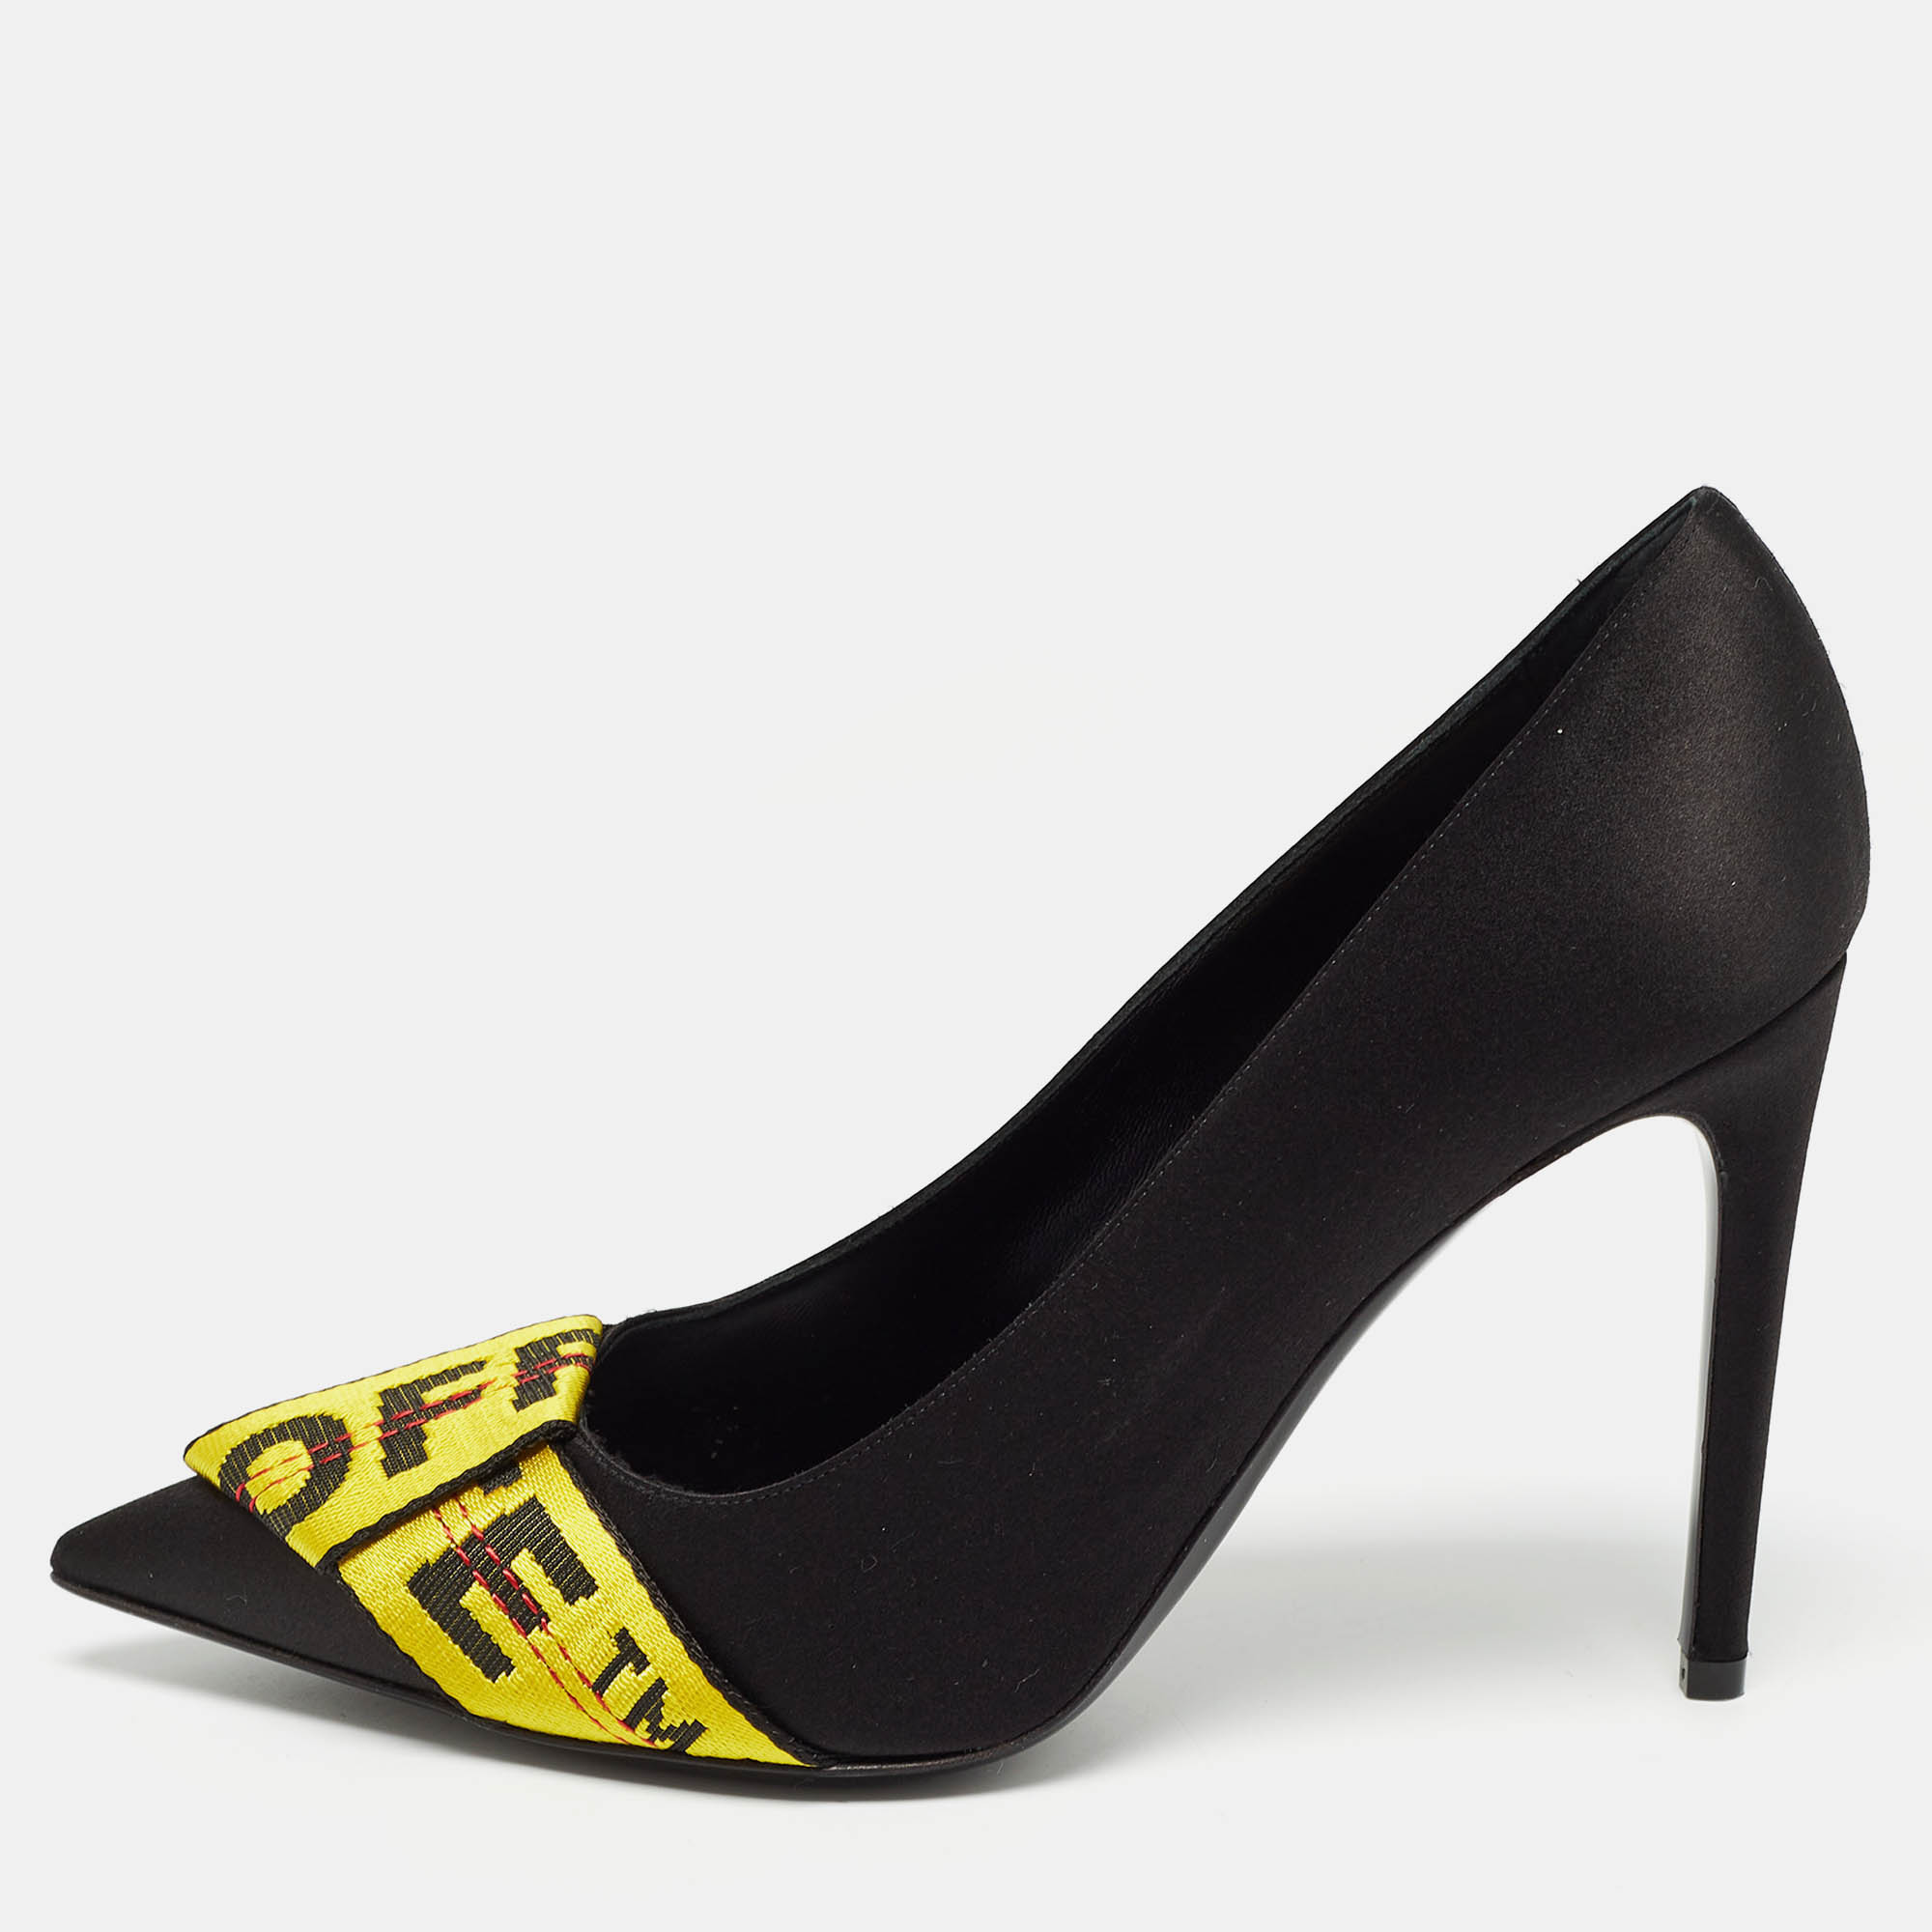 Off-white black/yellow satin and logo canvas pumps size 39